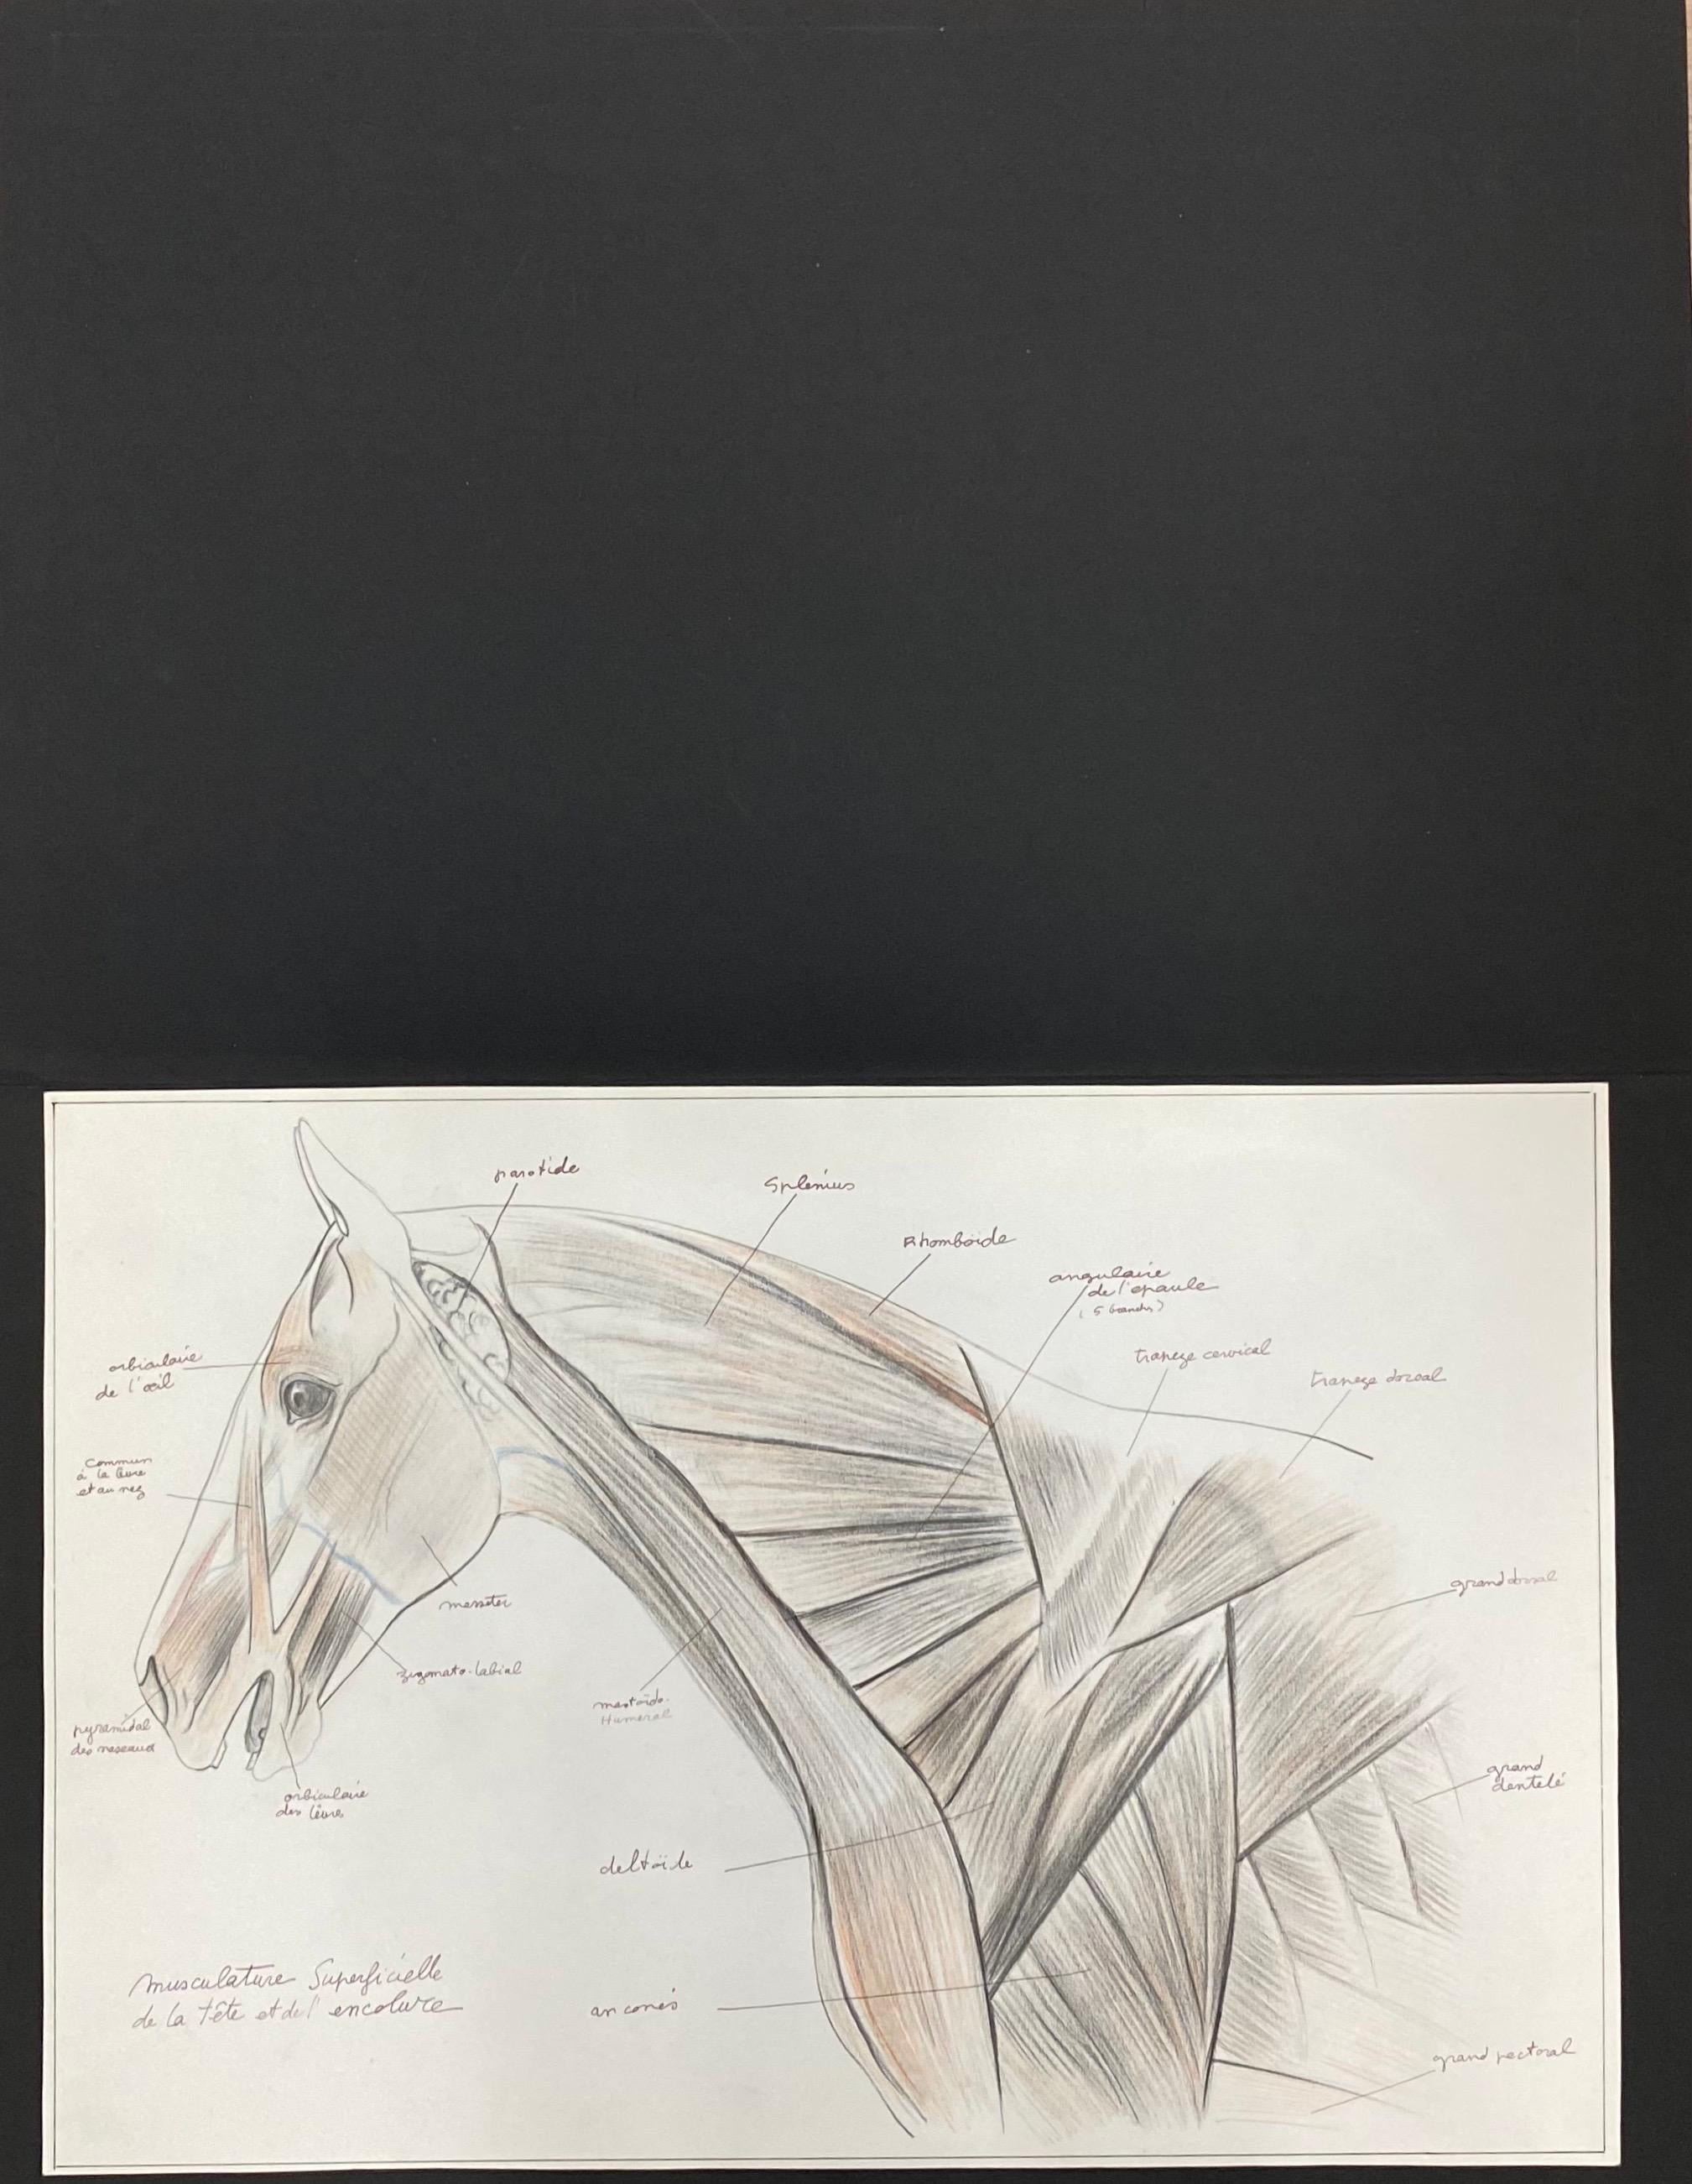 The Anatomy of a Horse
by Robert Ladou (French 1929-2014)
original drawing stuck on card in black folder/ thick paper, unframed
drawing: 12 x 17.75 inches
overall size: 19.75 x 12.75 inches
condition: very good
provenance: from the artists